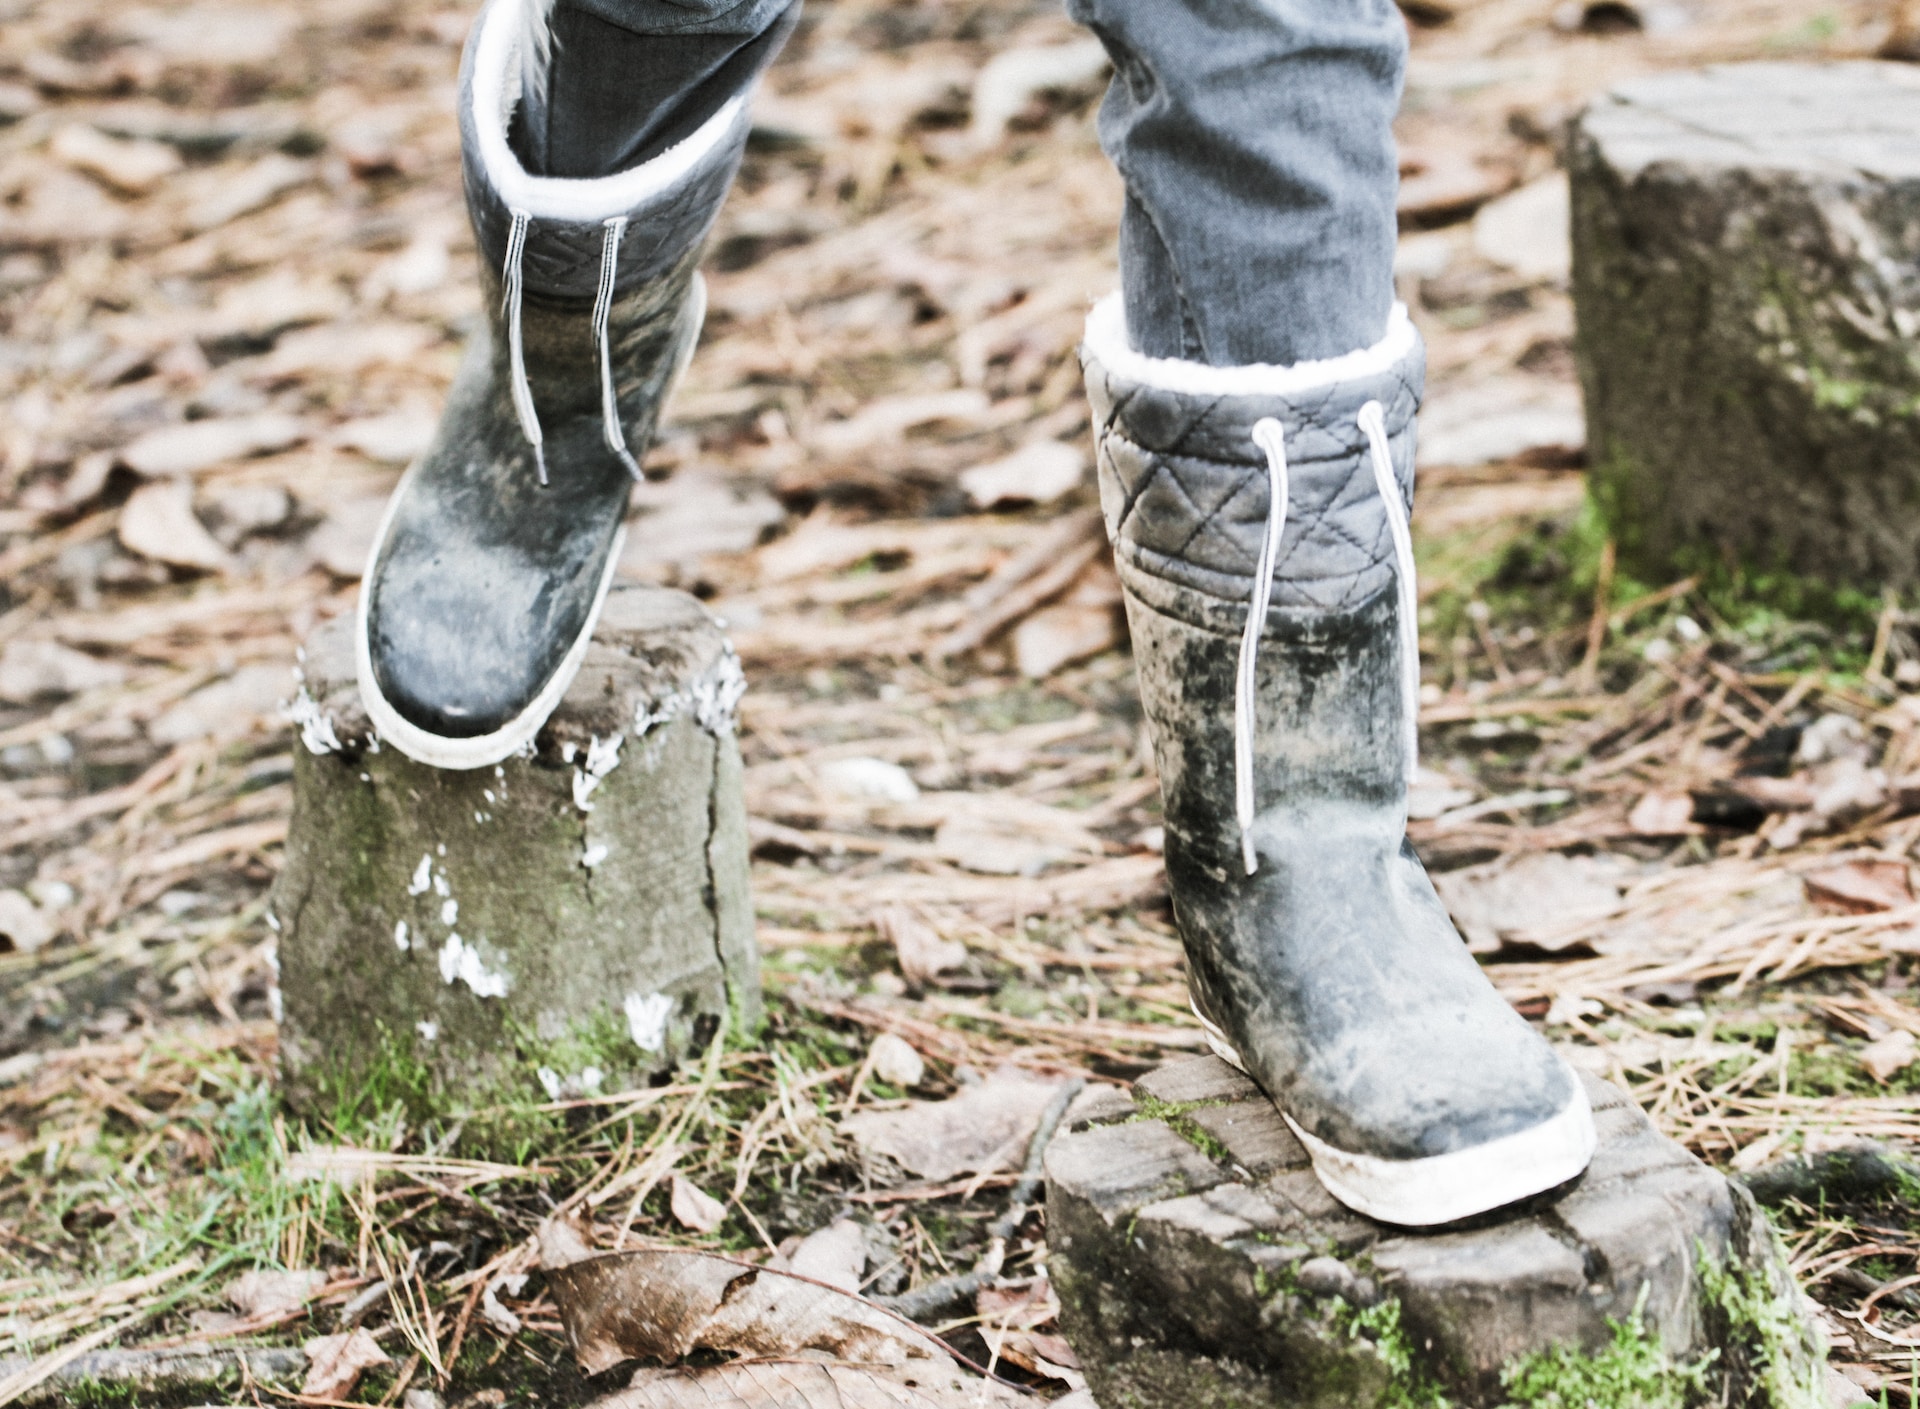 How Are Hiking Boots Different?